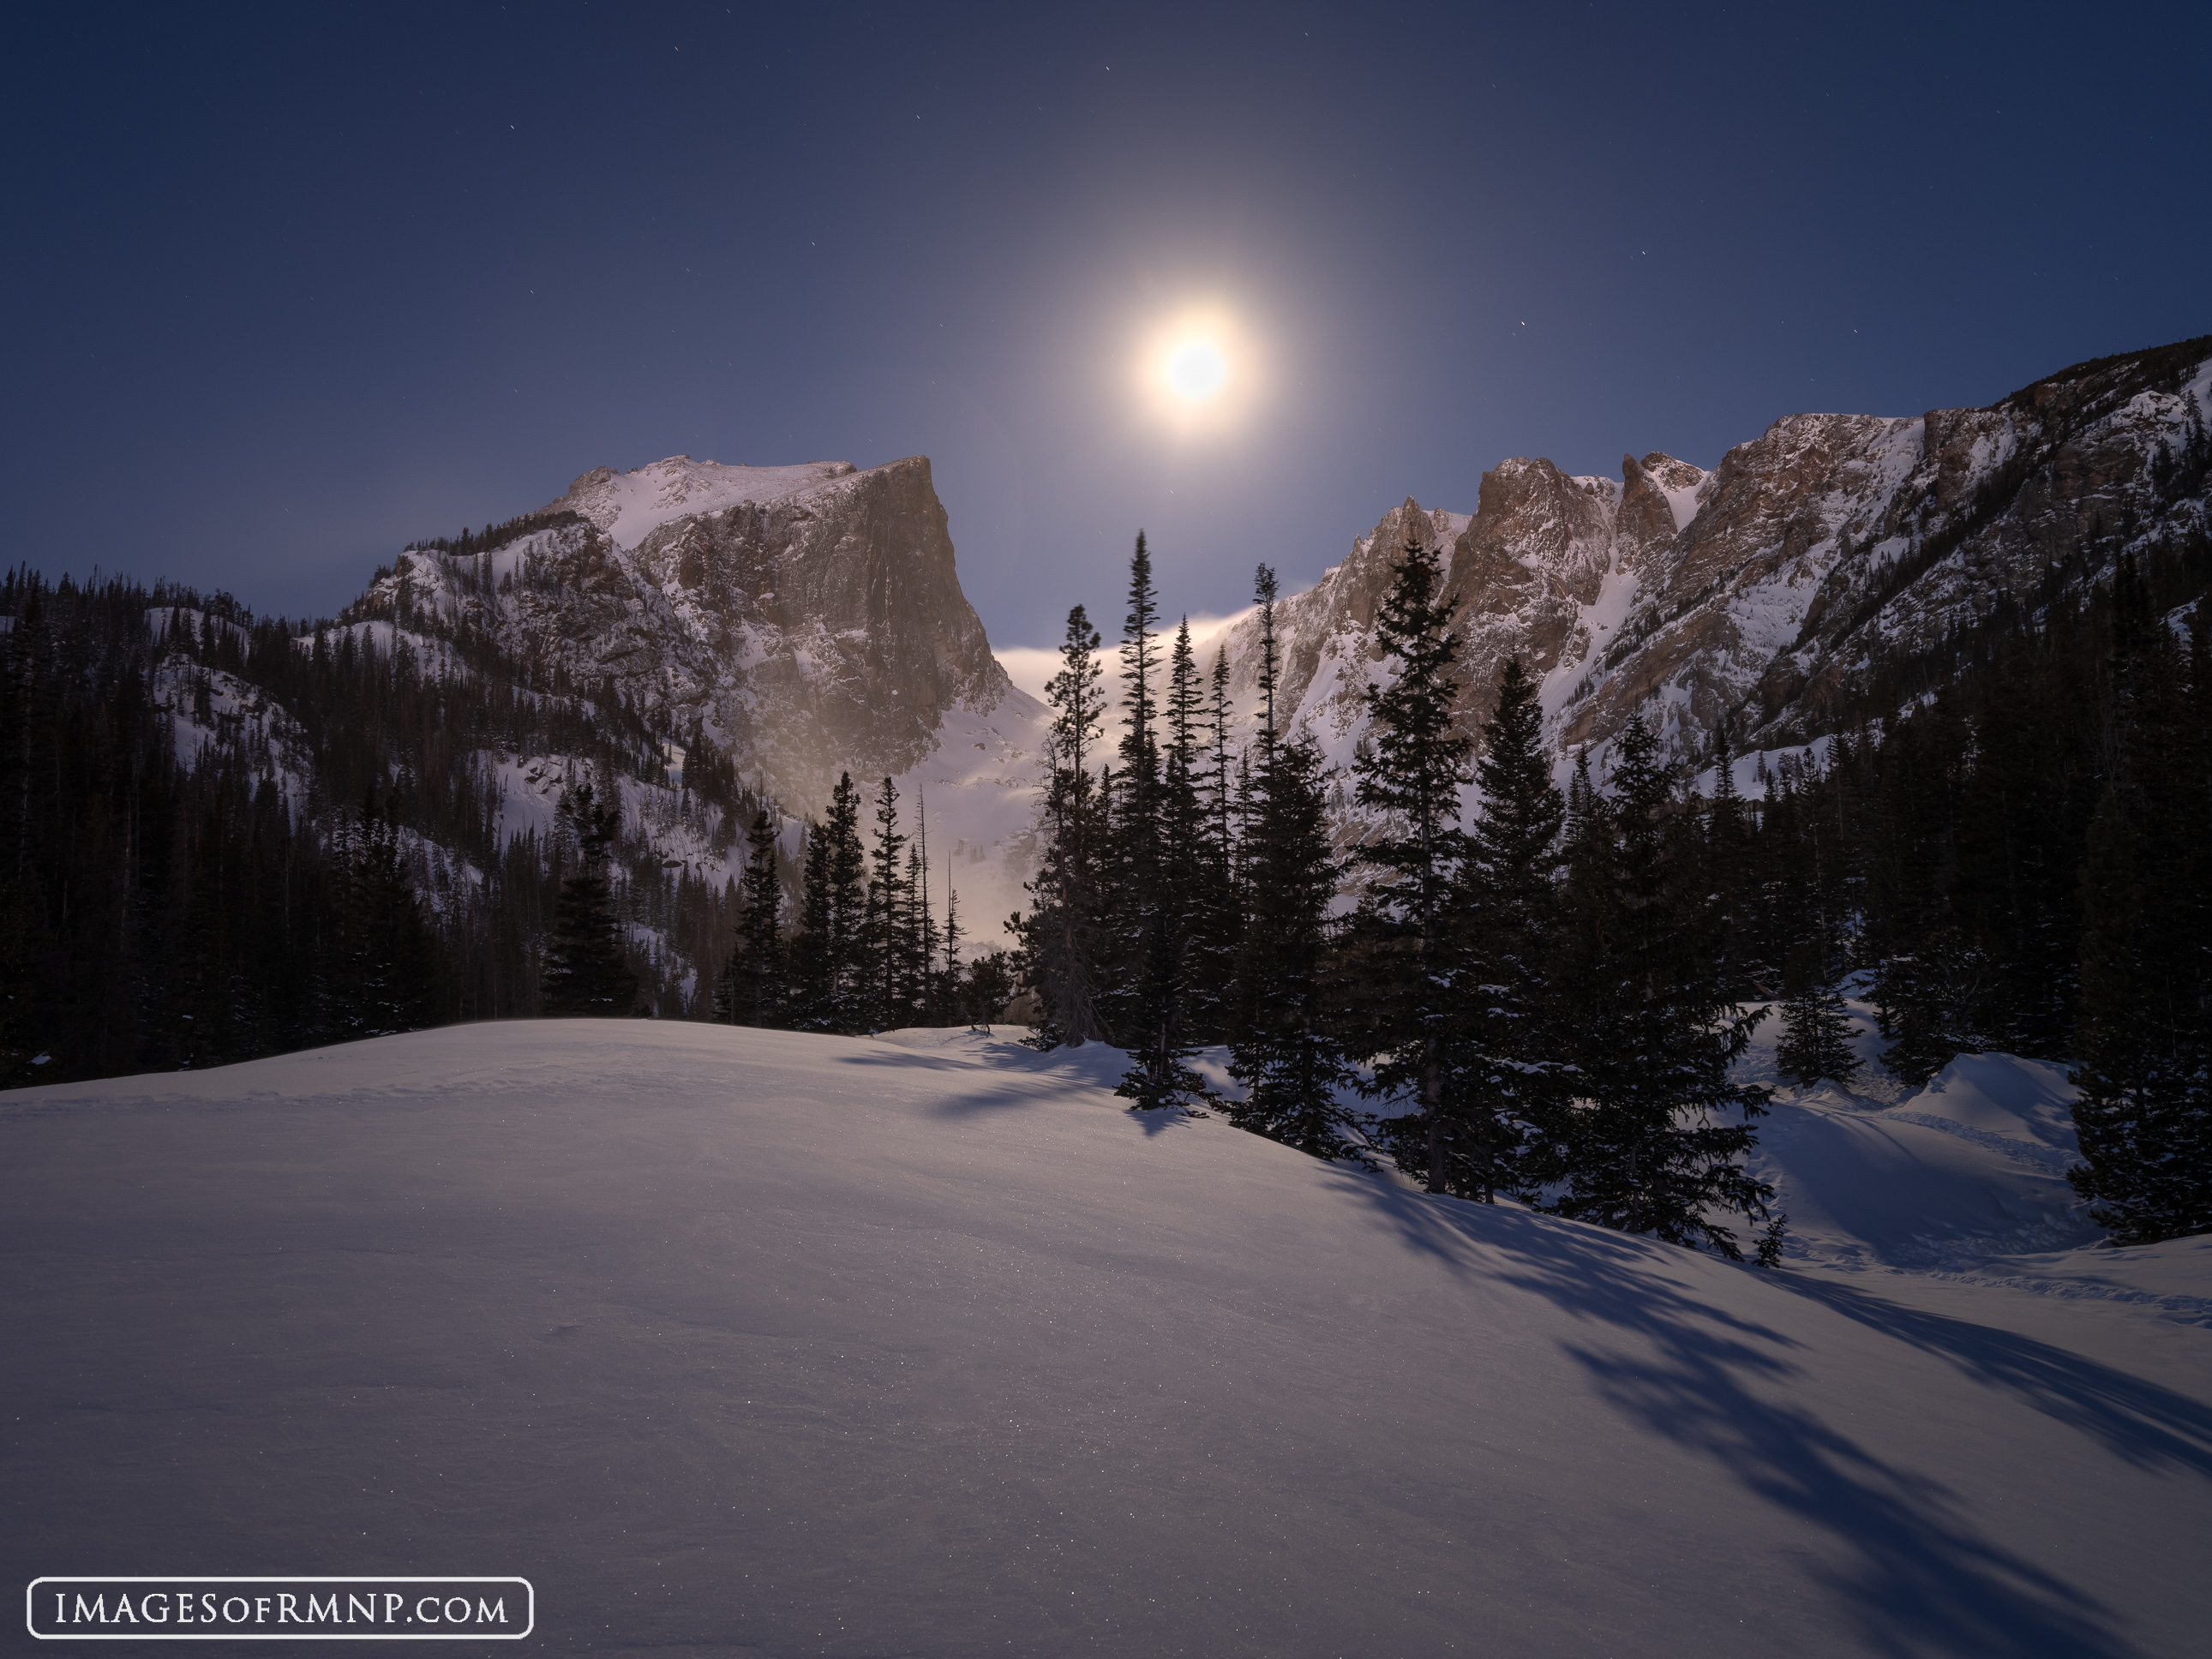 Hallett Peak and Flattop Mountain are gently warmed by the predawn light from the east. At the same time a full moon sets between...